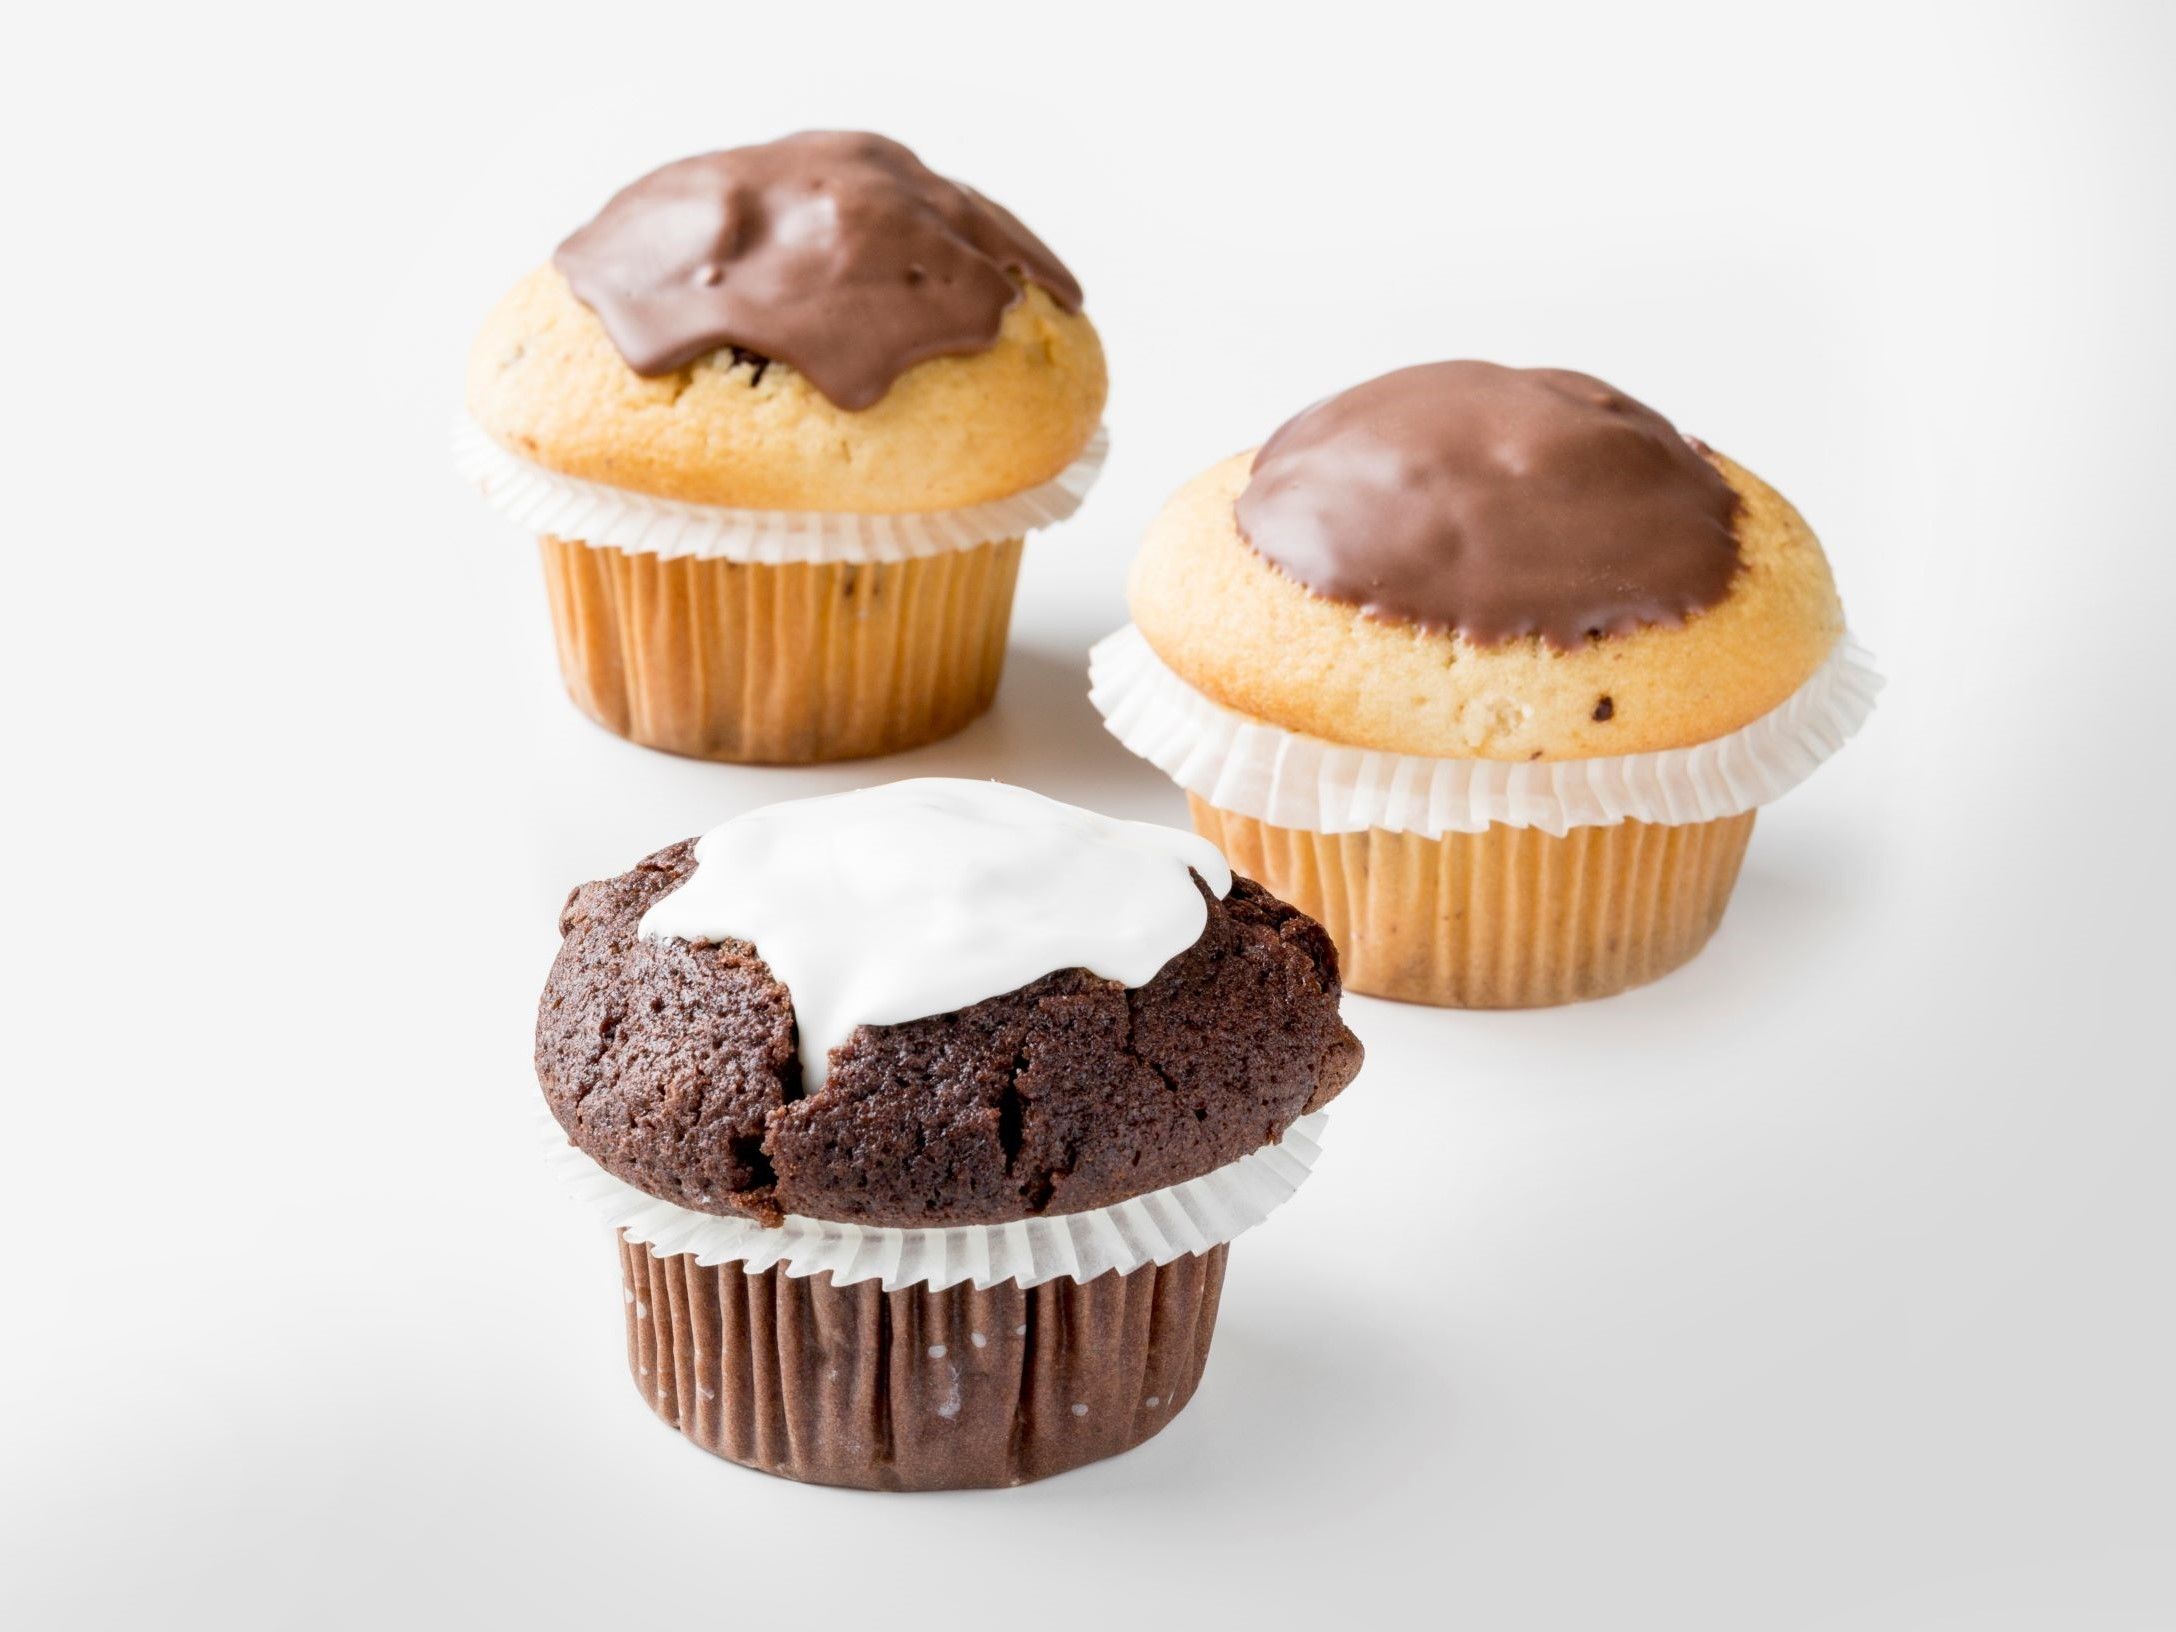 Three muffins topped with chocolate